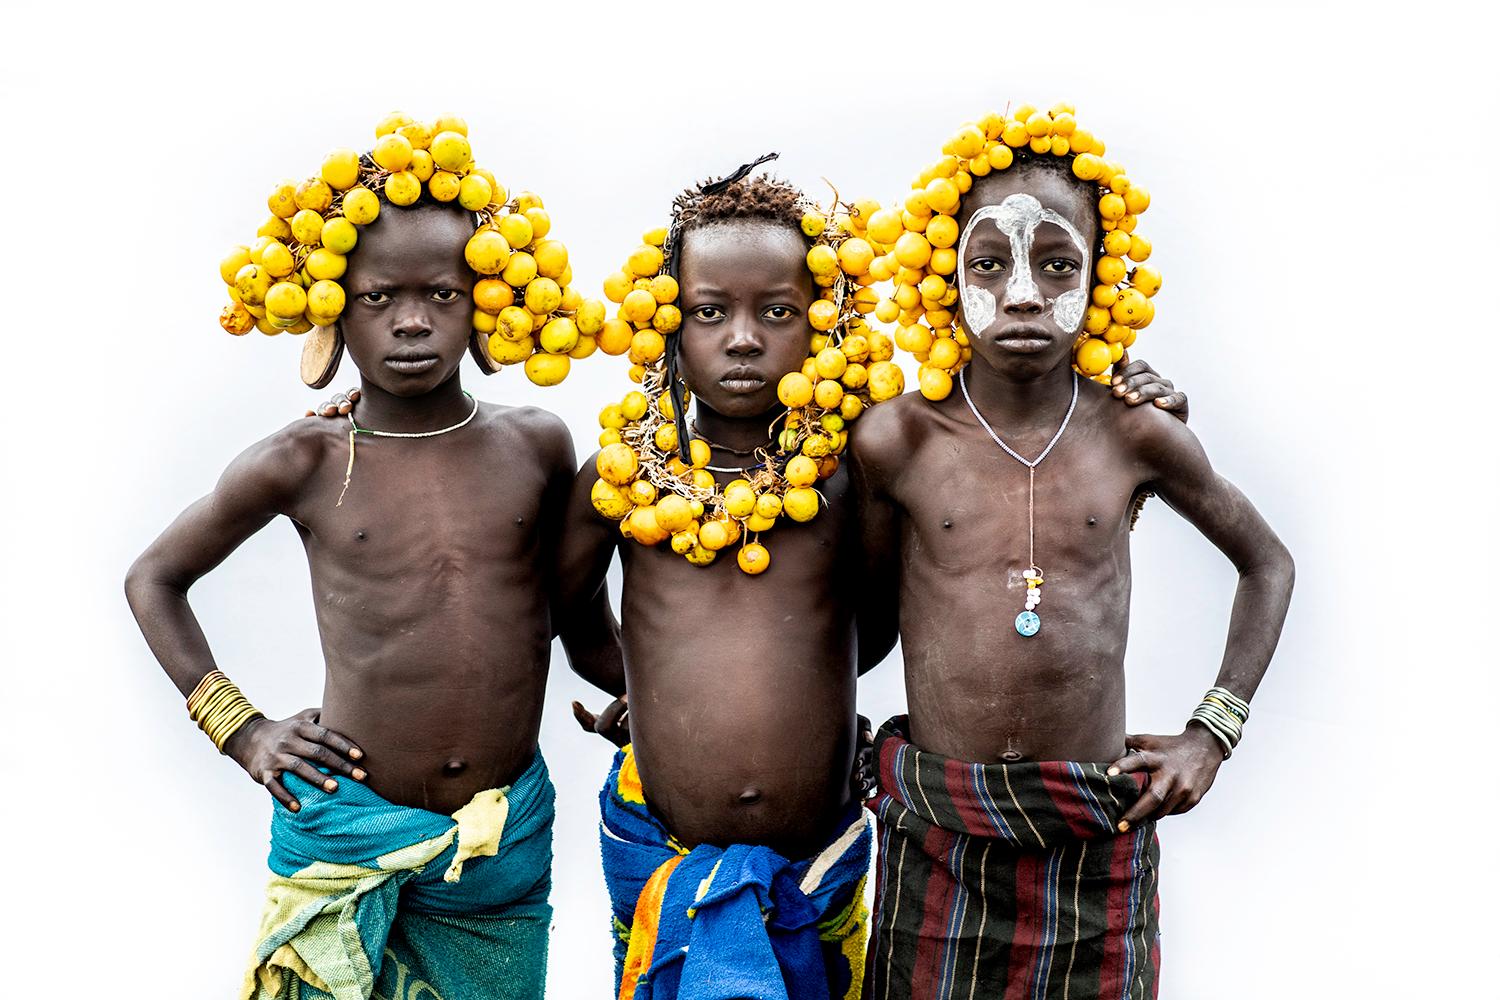 "3 Mursi Boys B" Photography 26.5" x 40" inch Edition 2/7 by Safaa Kagan

Omo Valley, Ethiopia

ABOUT 

Safaa is a Los Angeles based photographer with a mission to dissolve the surface-level barriers presented in humanity. Born in Casablanca,